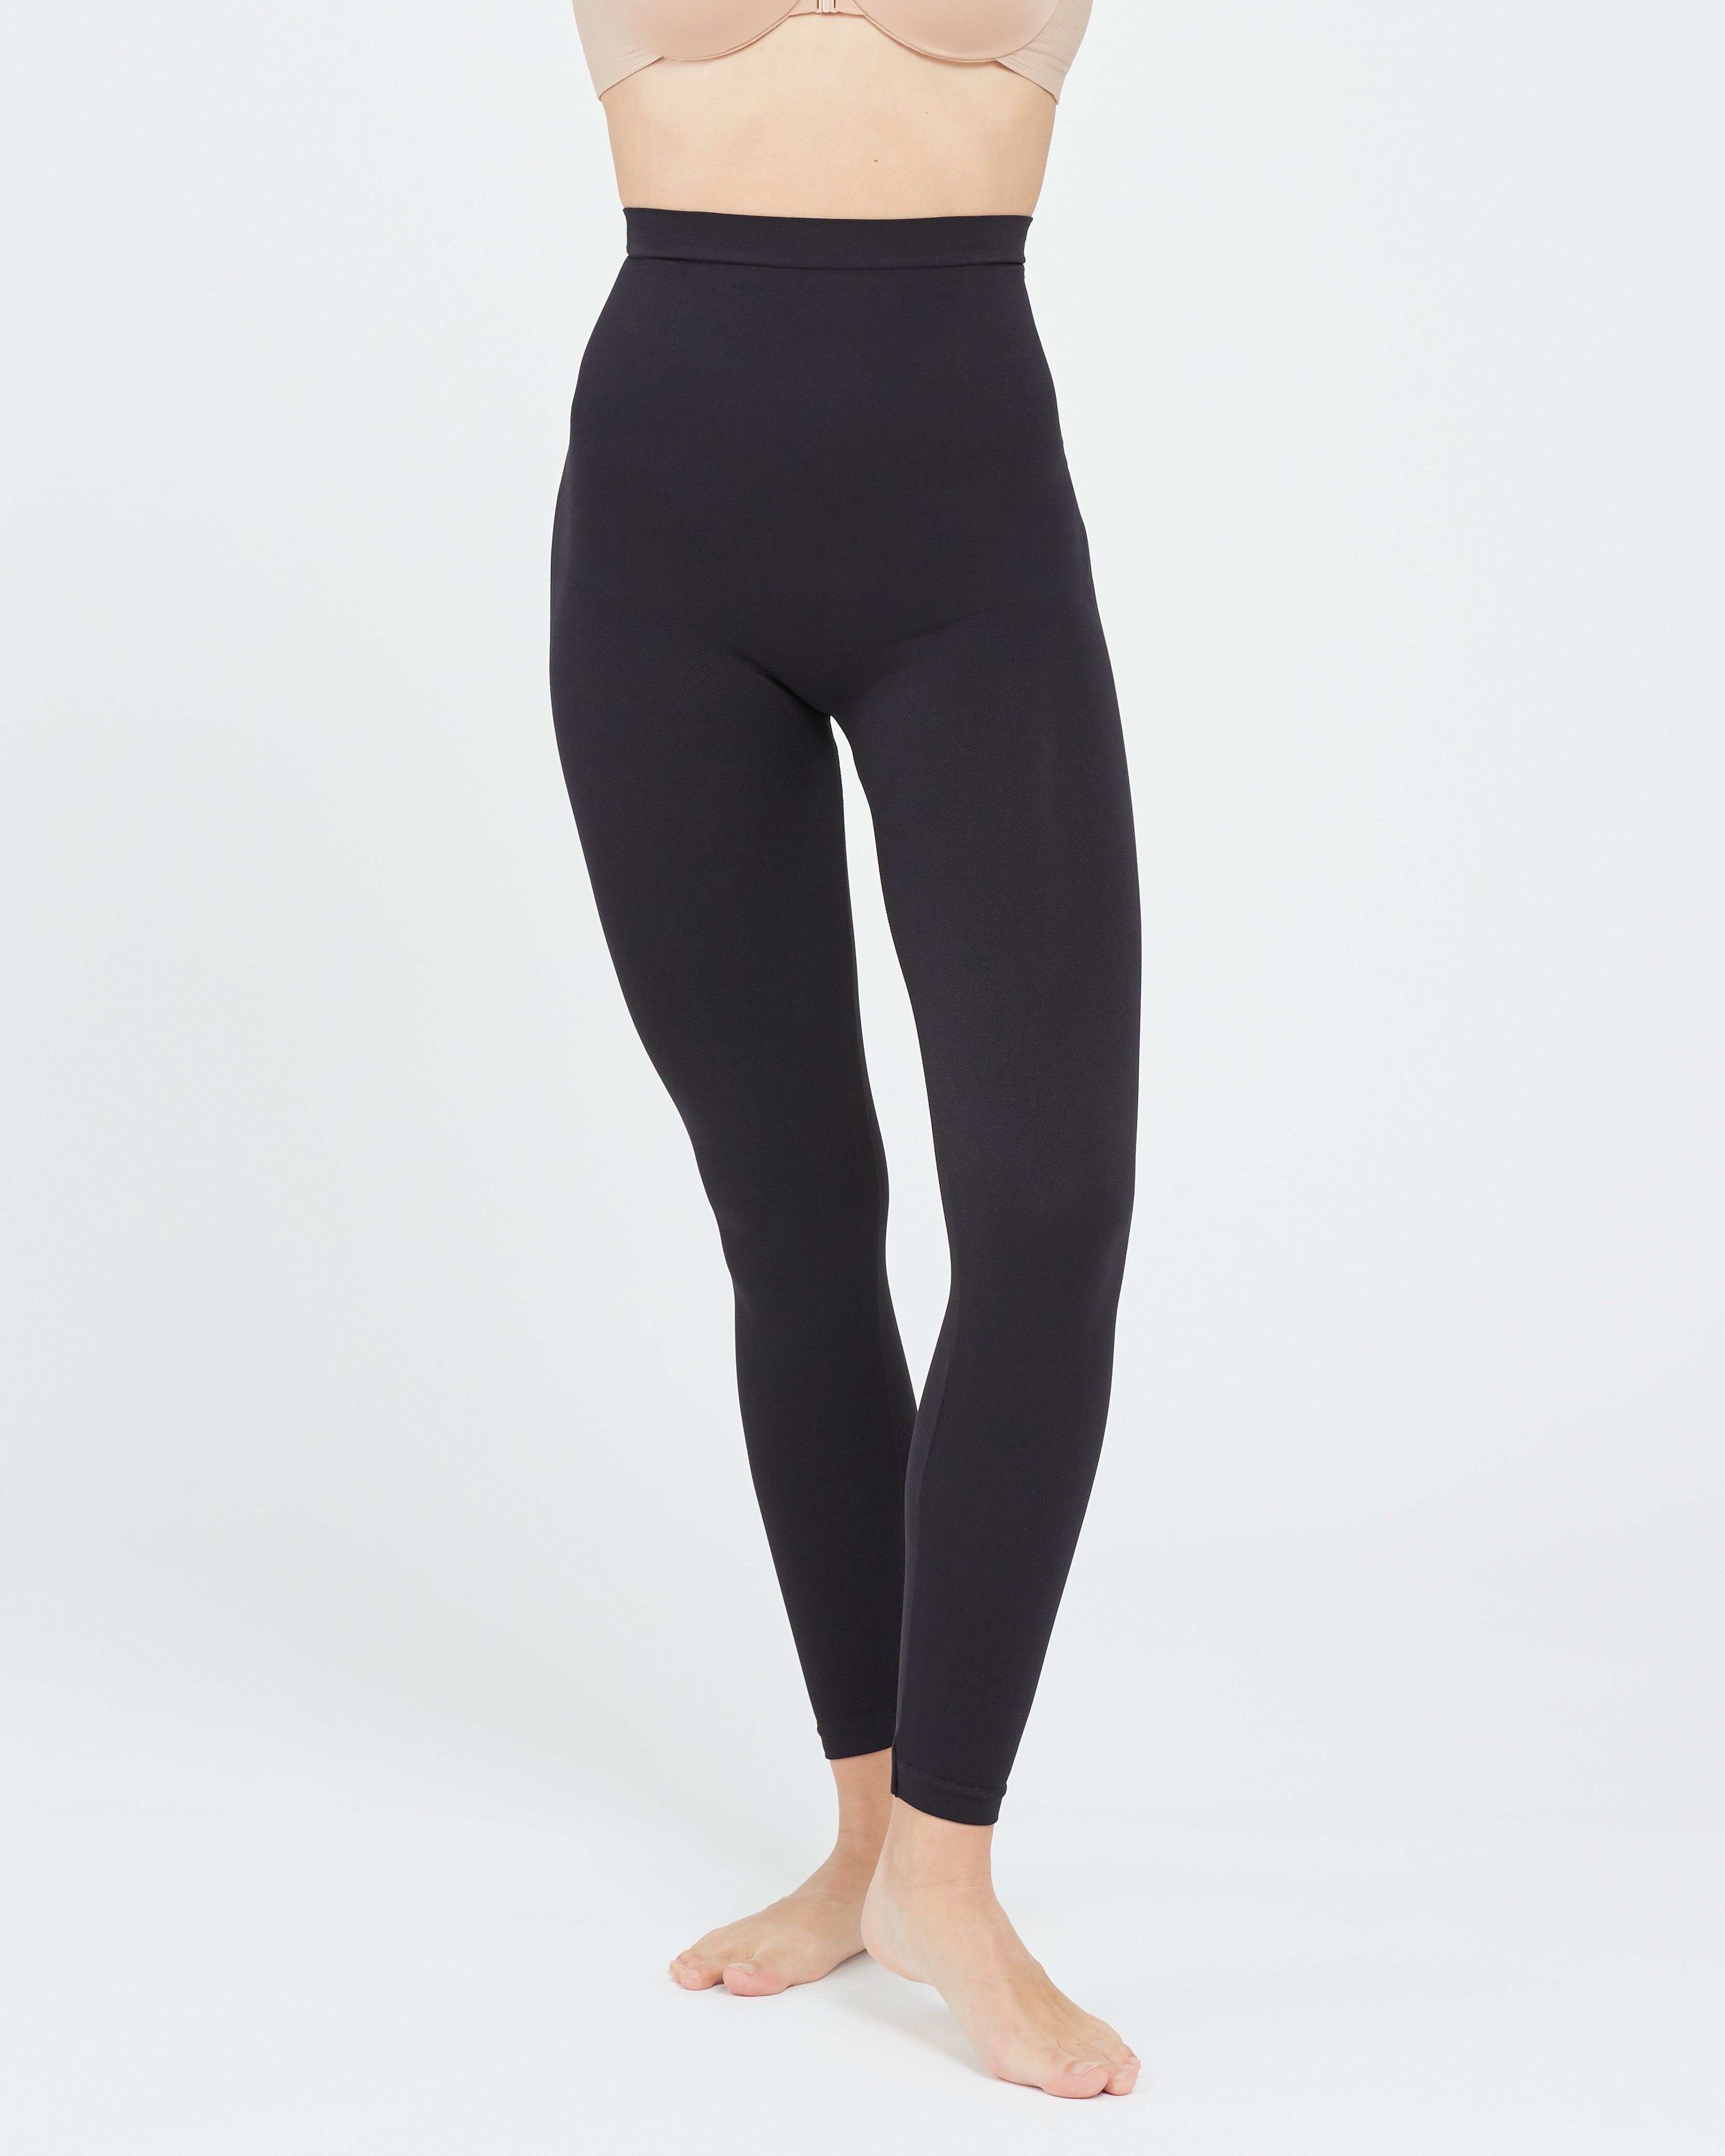 TVSN - Be comfortable and look your best with @spanx – seamless